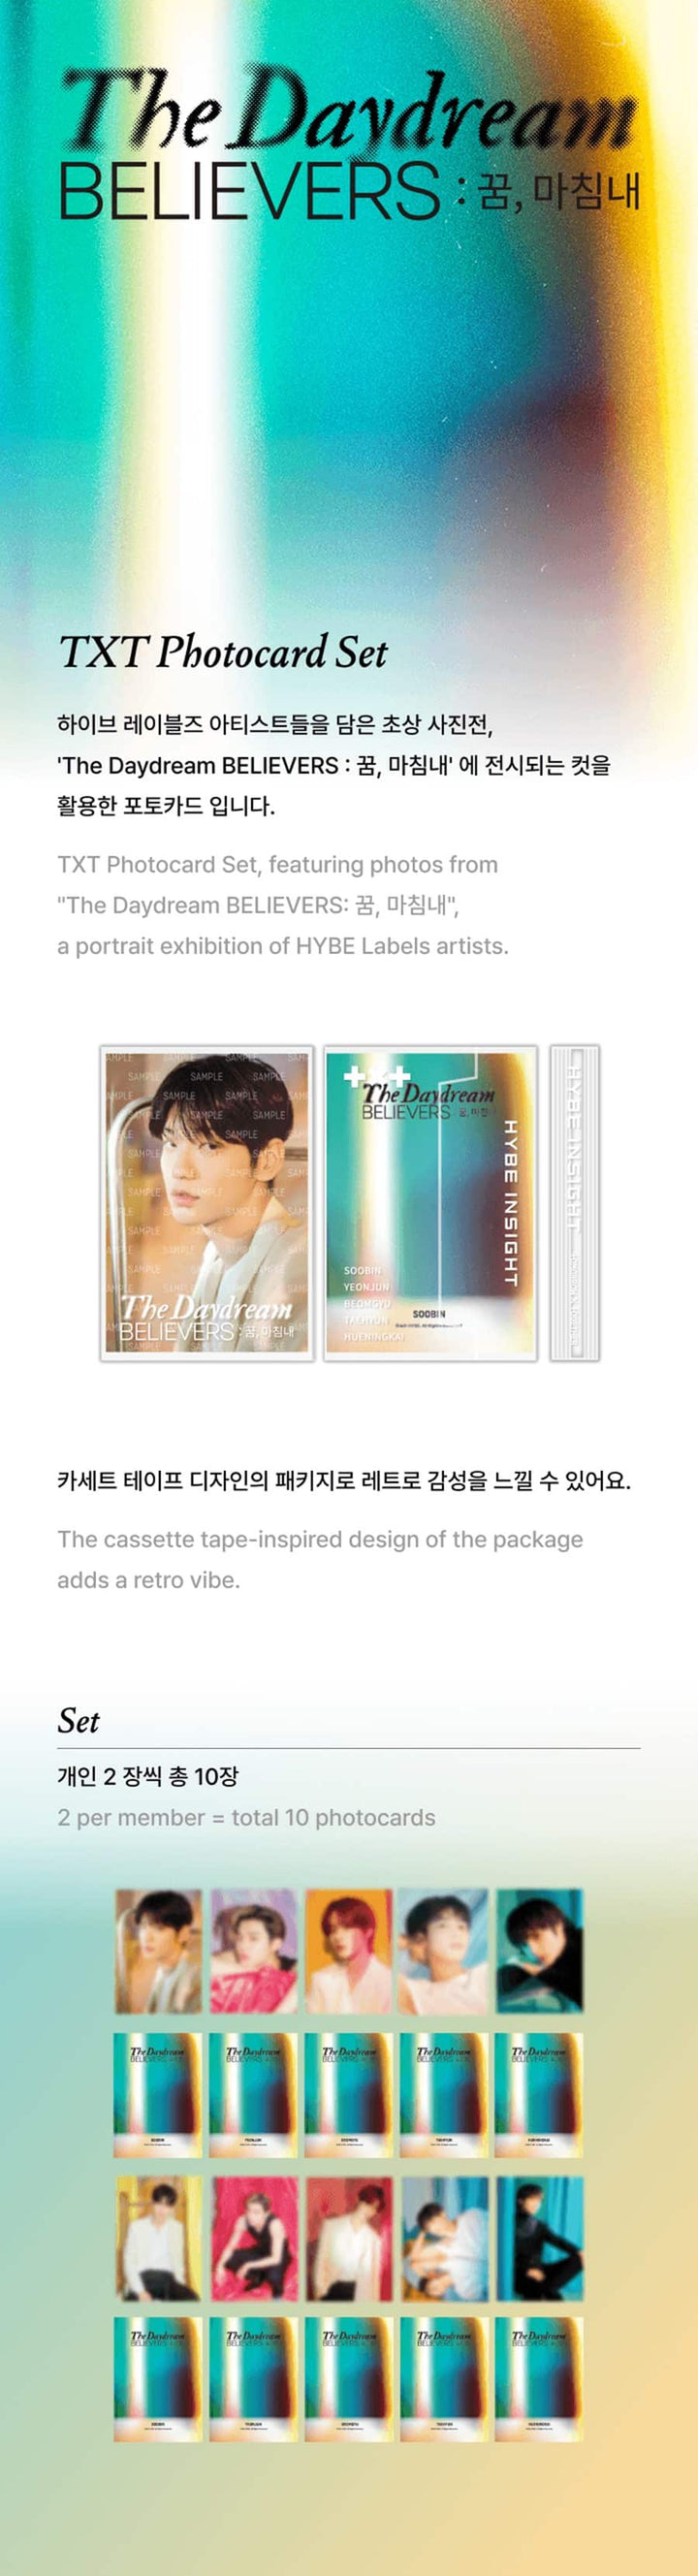 HYBE INSIGHT TOMORROW X TOGETHER OFFICIAL PHOTOCARD FULL SET 'The Daydream BELIEVERS' exhibition